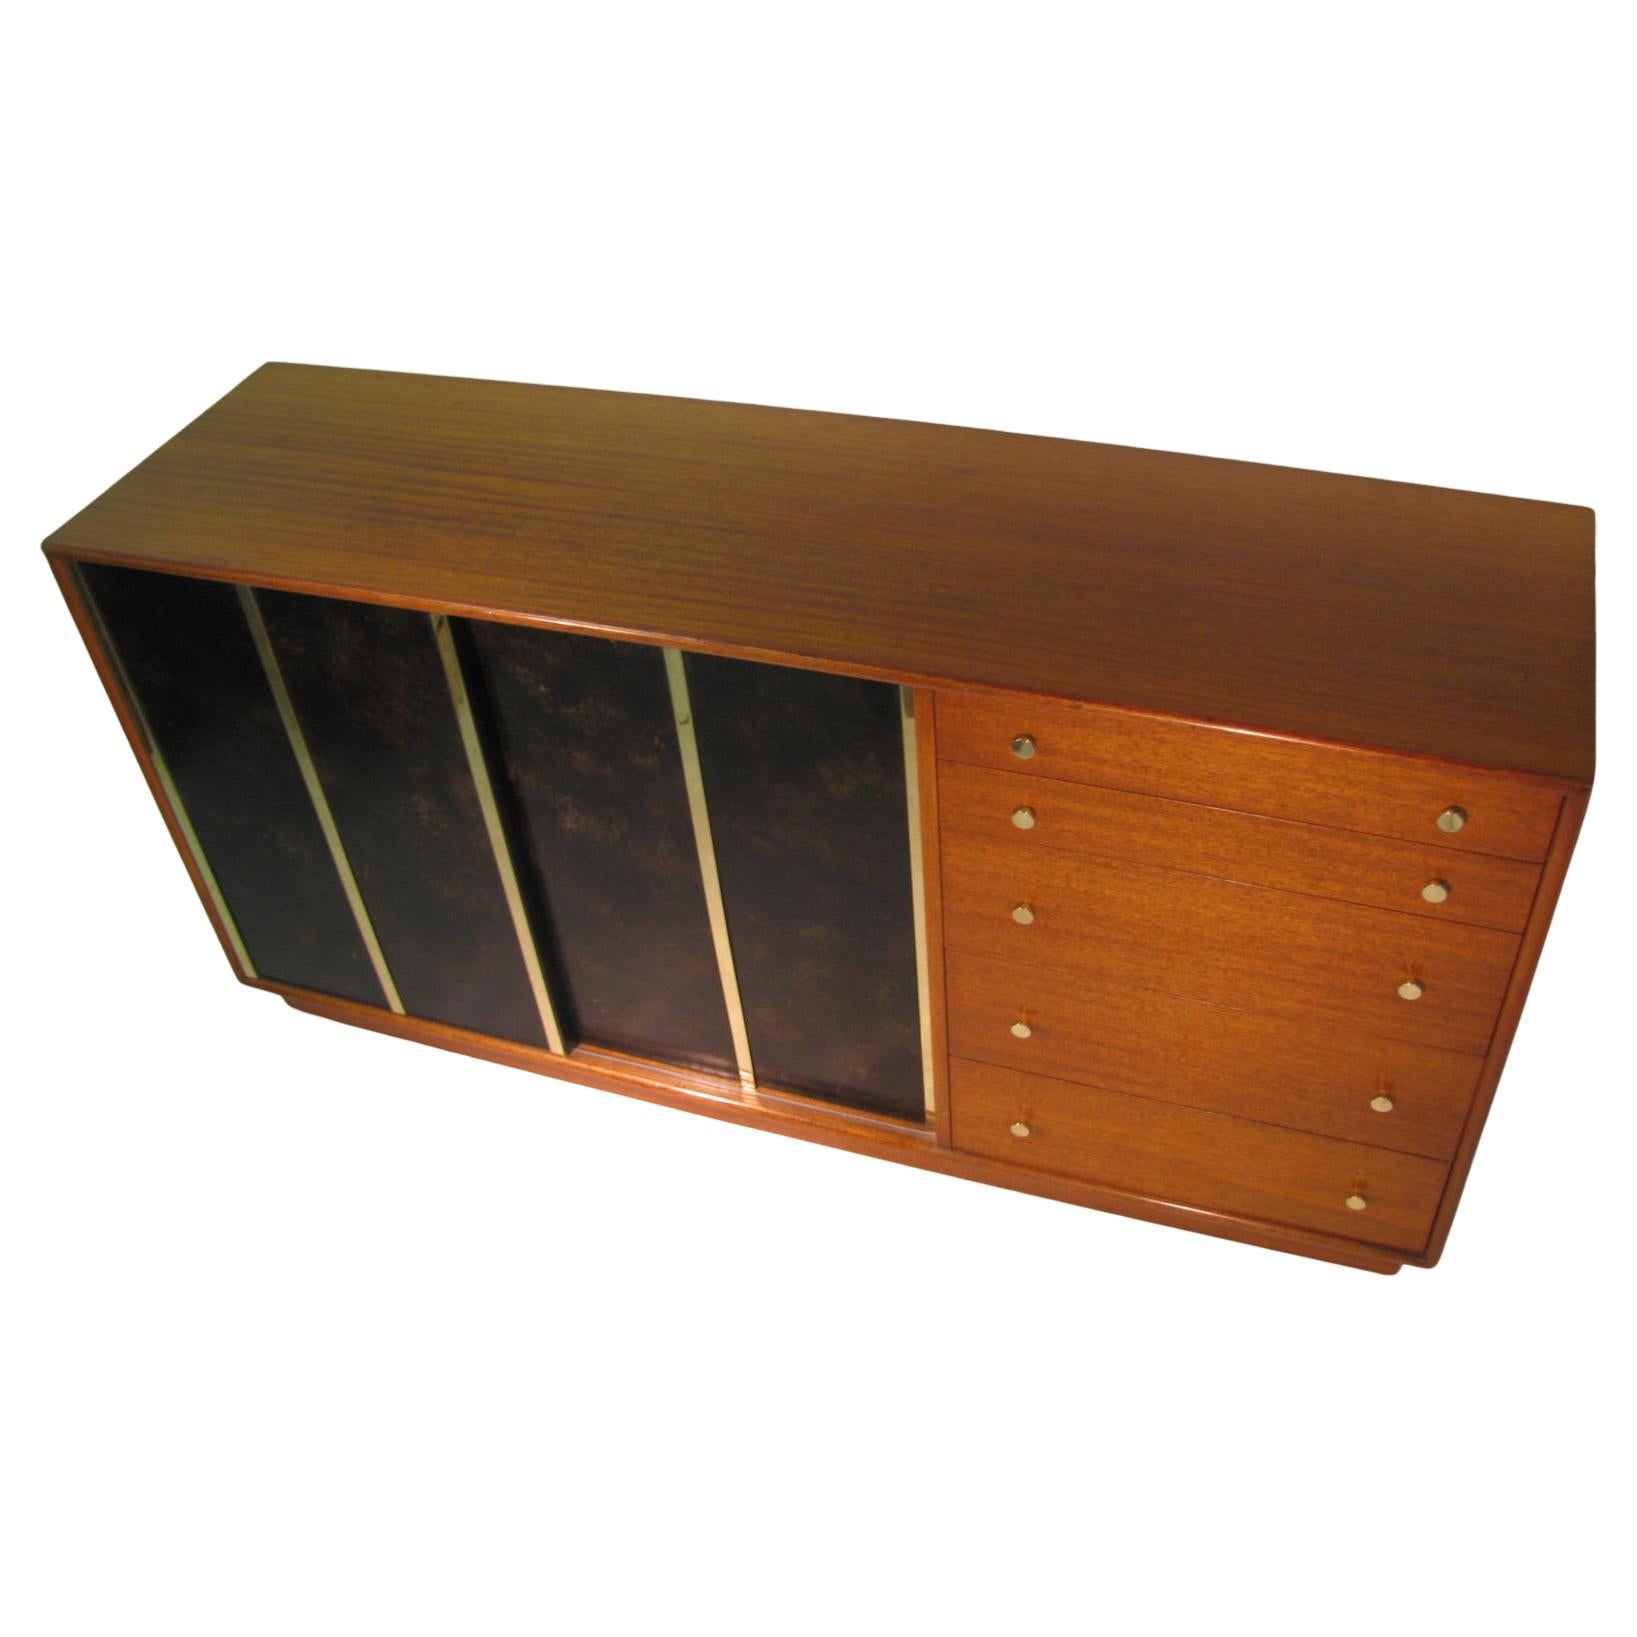 American Mid-Century Modern 5 Drawer Dresser 2 Door with Leather Brass Harvey Probber For Sale